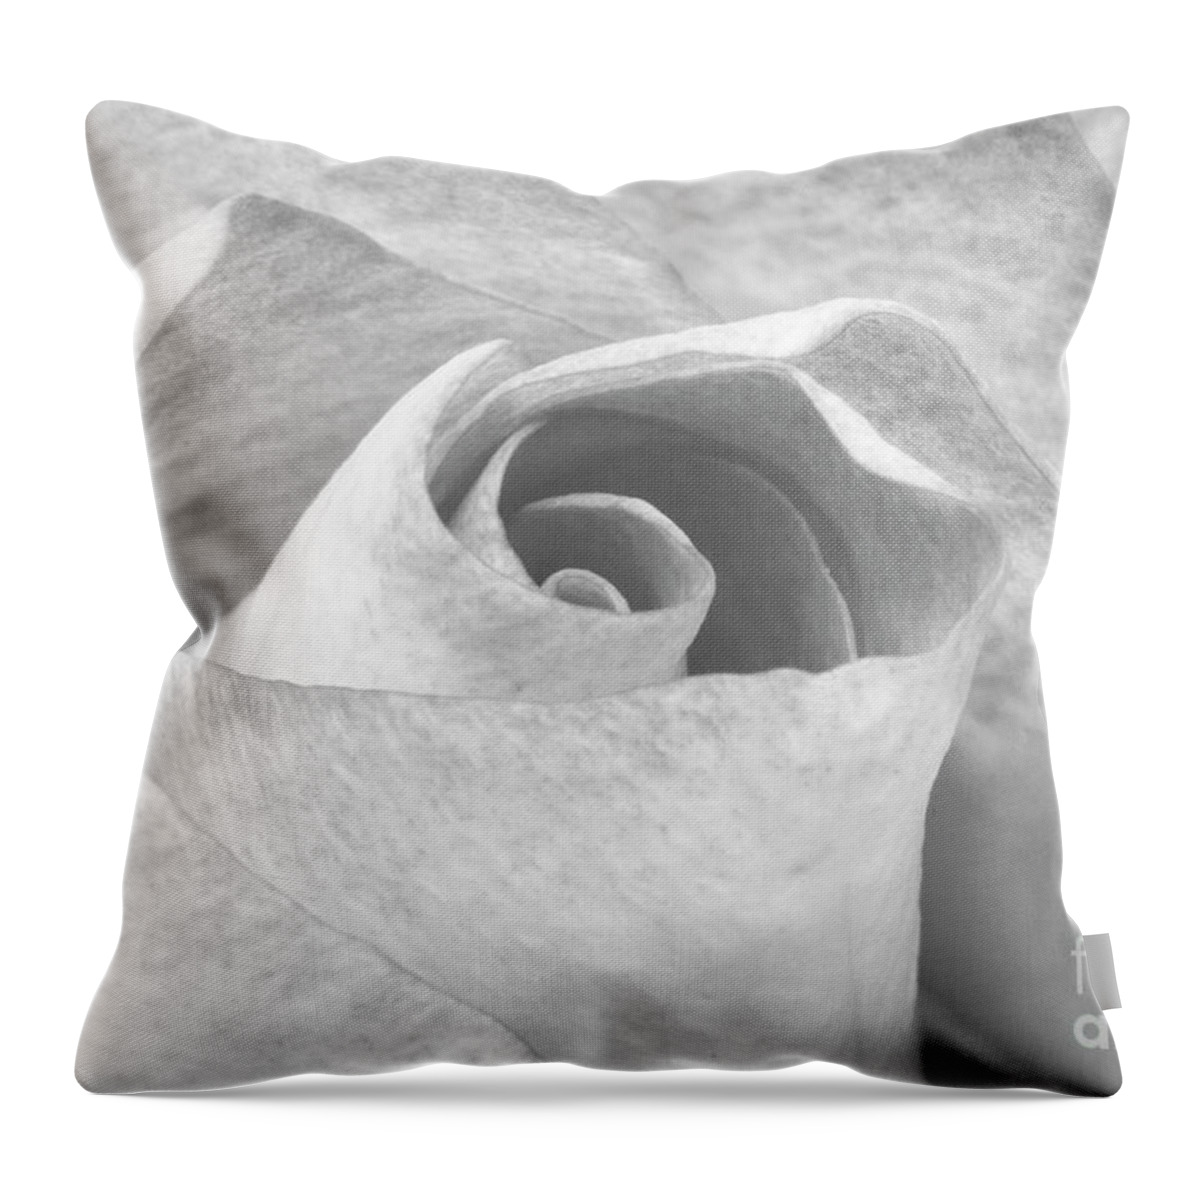 B&w Throw Pillow featuring the photograph A Rose is a Rose Black and White Floral Photo 753 by Ricardos Creations